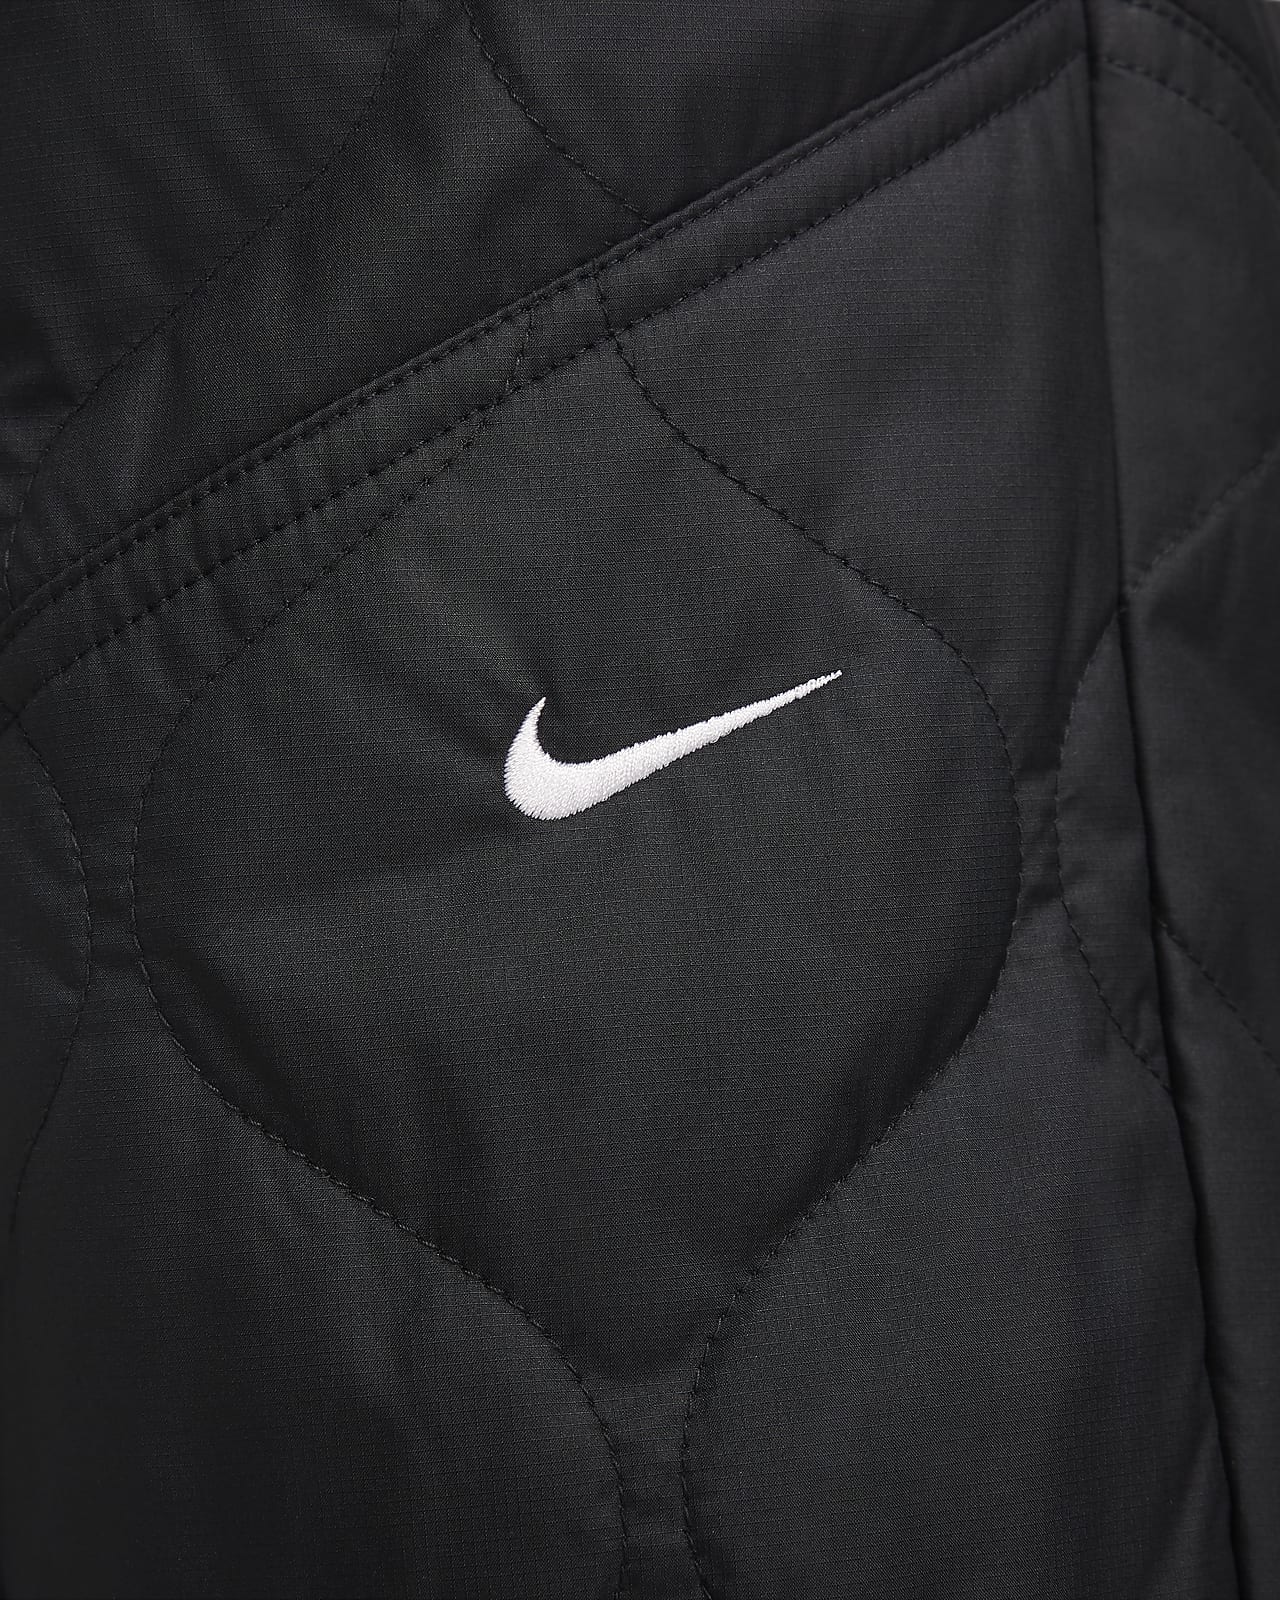 Nike Sportswear Essential Women's High-Waisted Open-Hem Quilted Trousers.  Nike CA